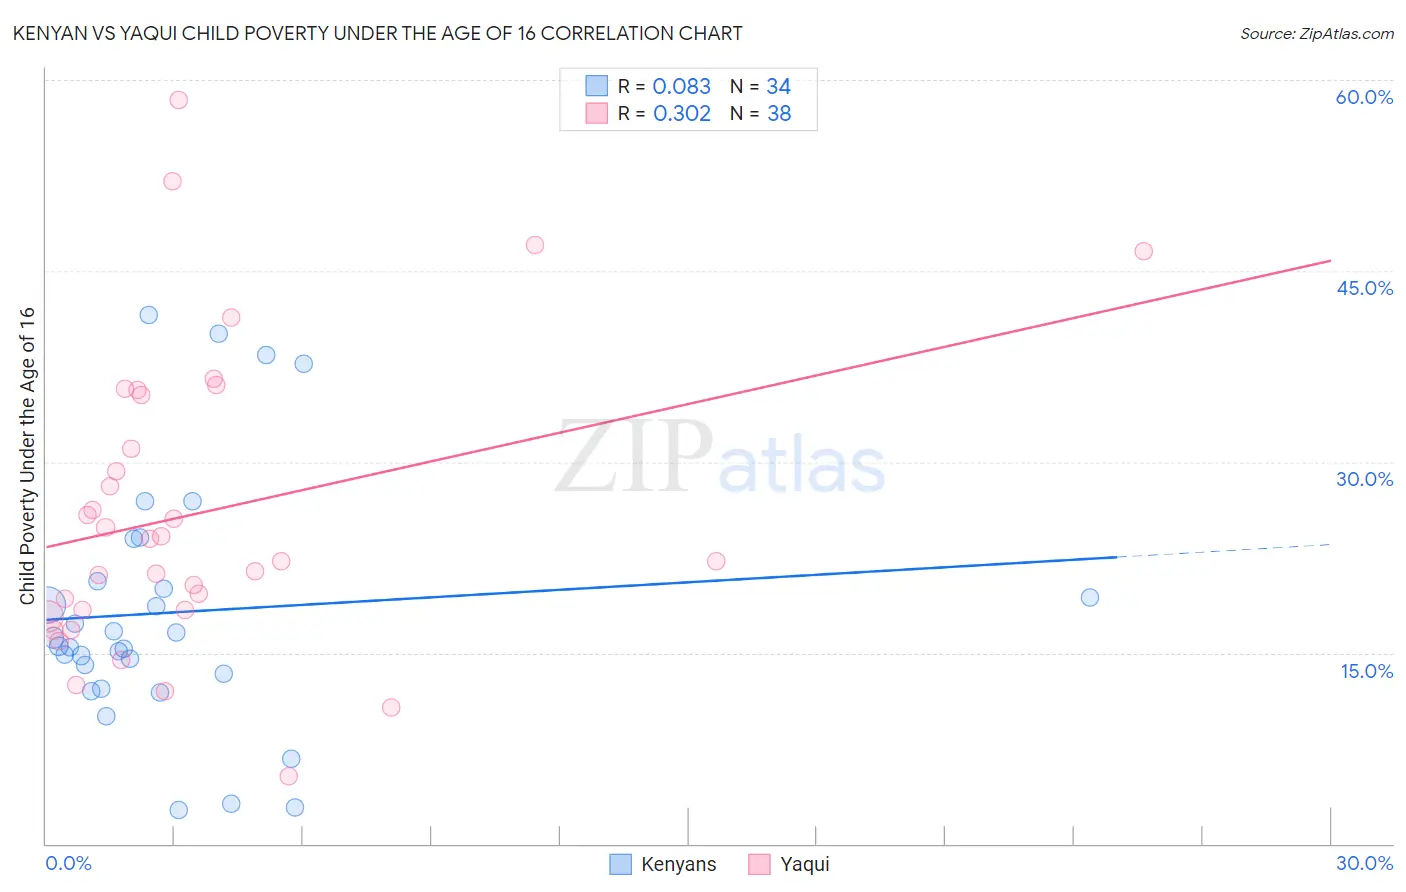 Kenyan vs Yaqui Child Poverty Under the Age of 16